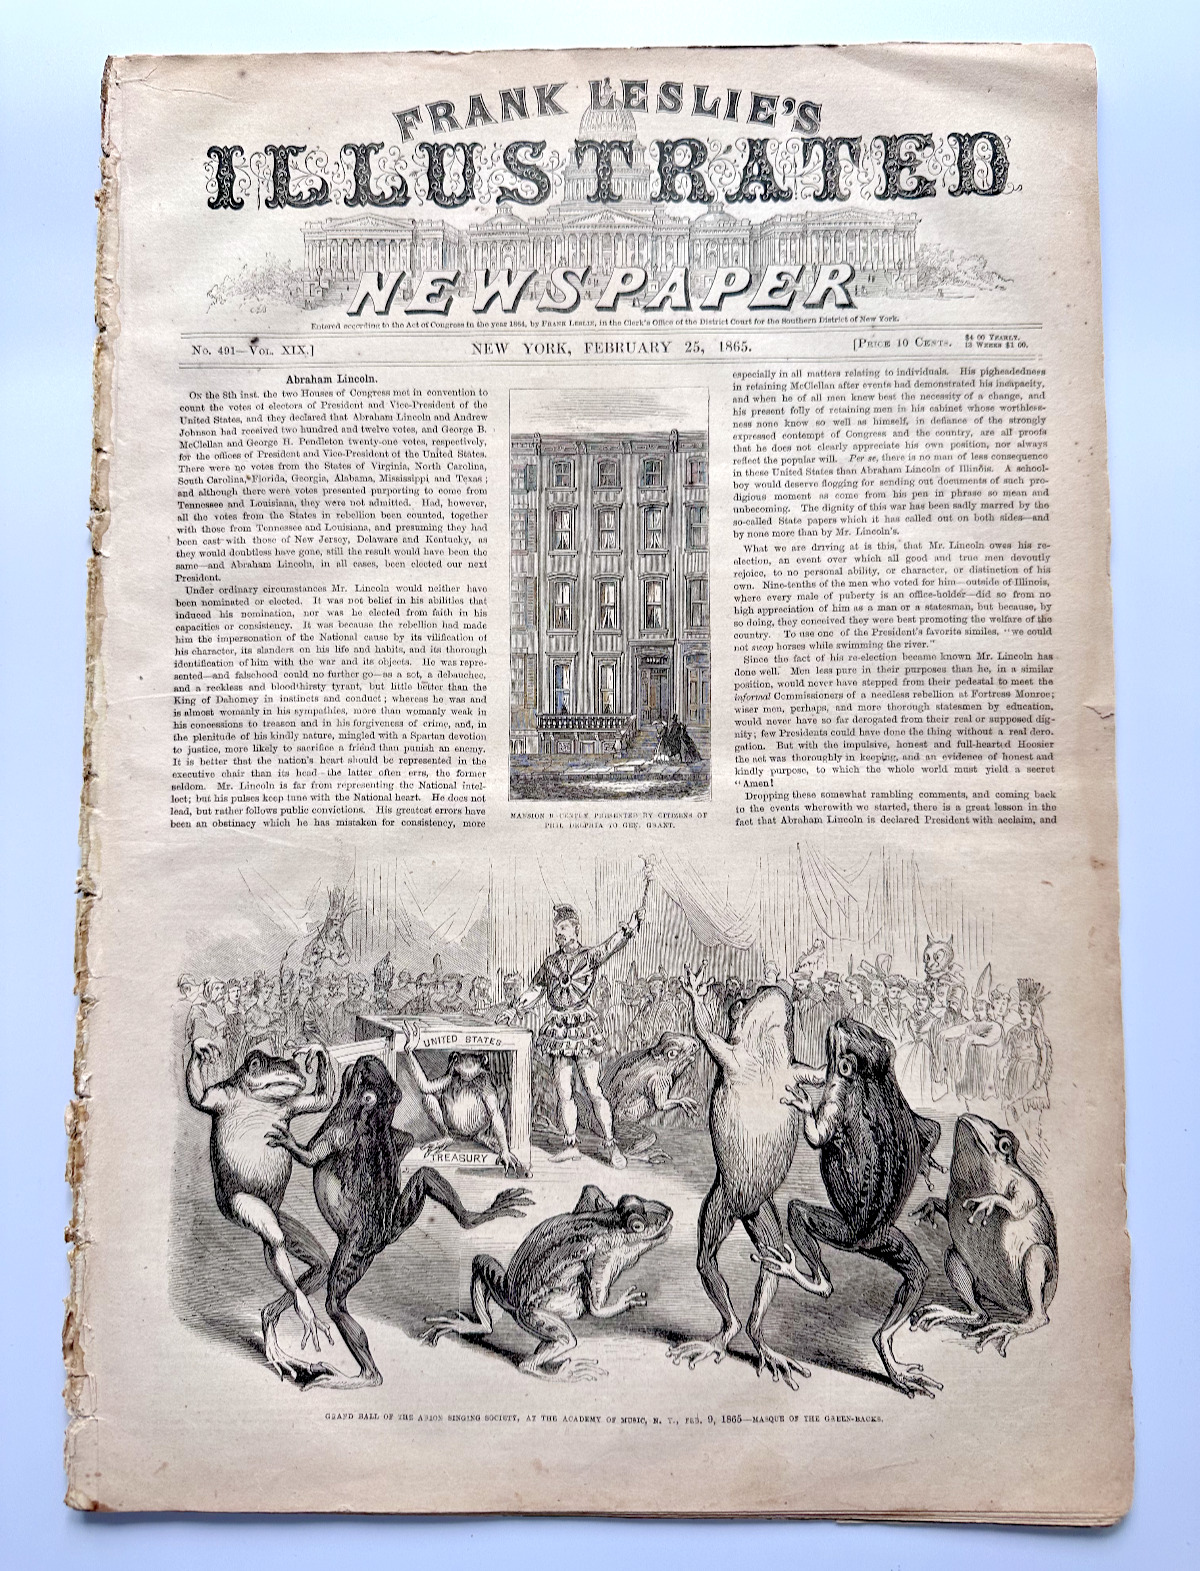 FEBRUARY 25, 1865 FRANK LESLIE'S ILLUSTRATED NEWSPAPER, NEW YORK - A576